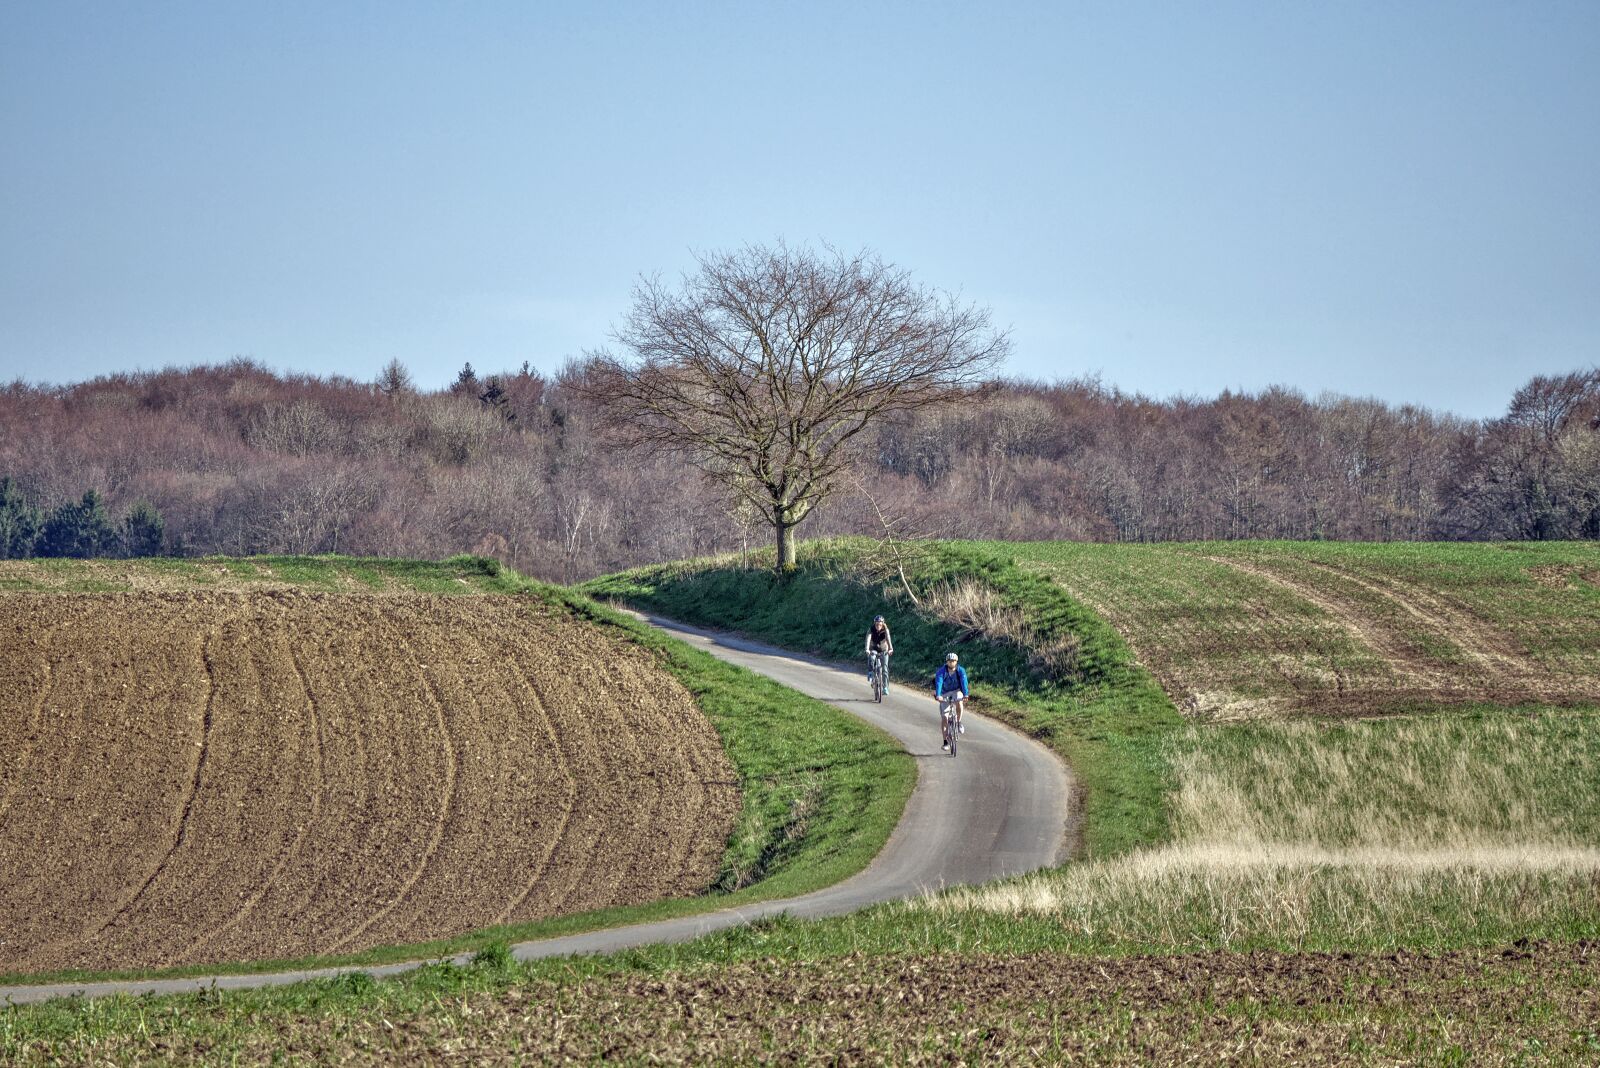 Panasonic Lumix DMC-GX85 (Lumix DMC-GX80 / Lumix DMC-GX7 Mark II) sample photo. Landscape, bicyclists, spring photography